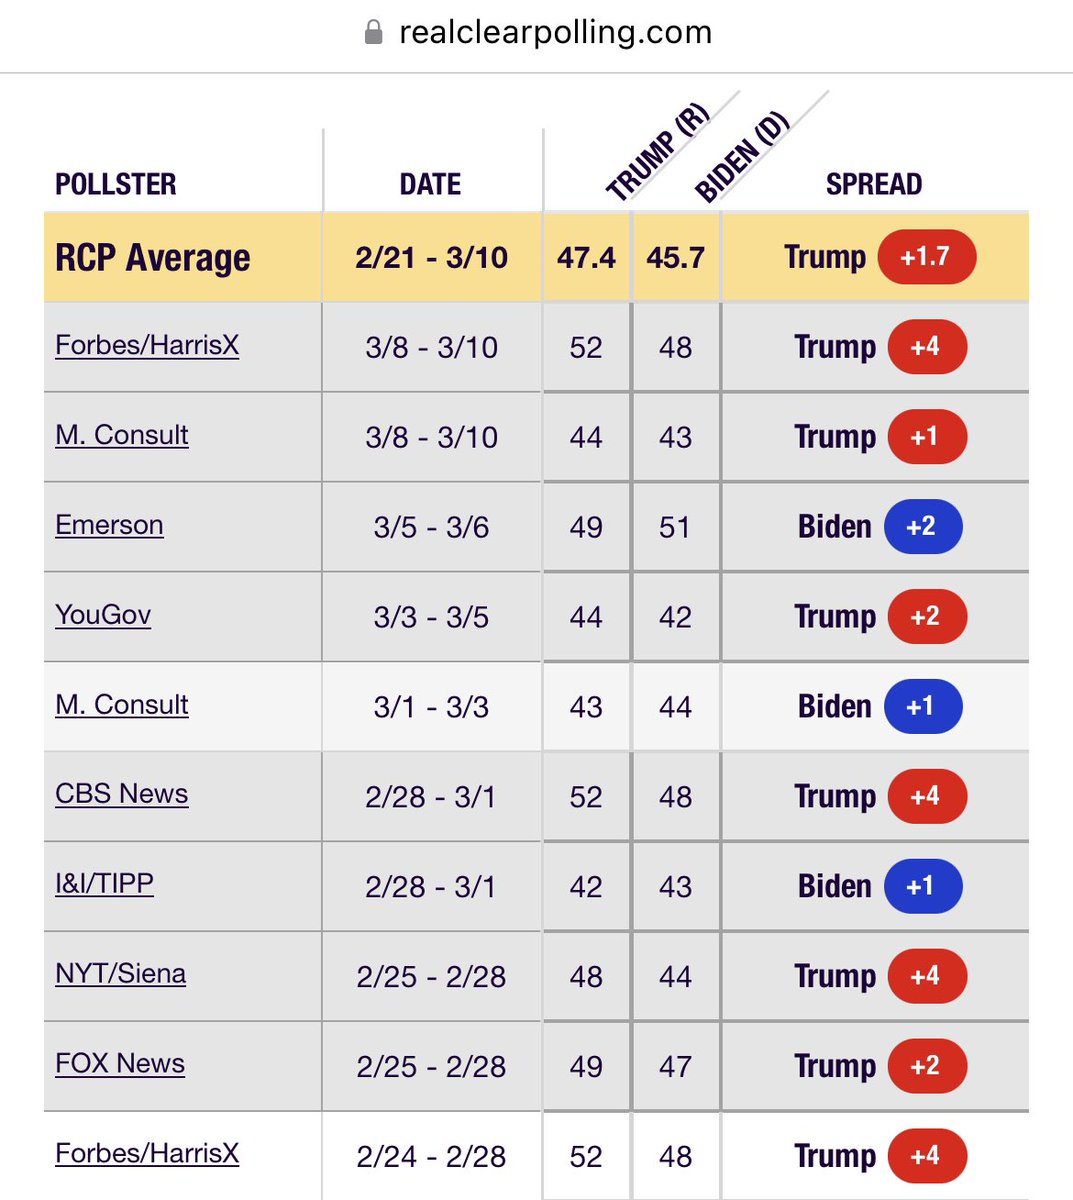 Two national polls conducted since Biden’s March 7 State of the Union: Forbes/HarrisX: Trump+4 (no change) Morning Consult: Trump+1 (2-point gain for Trump)